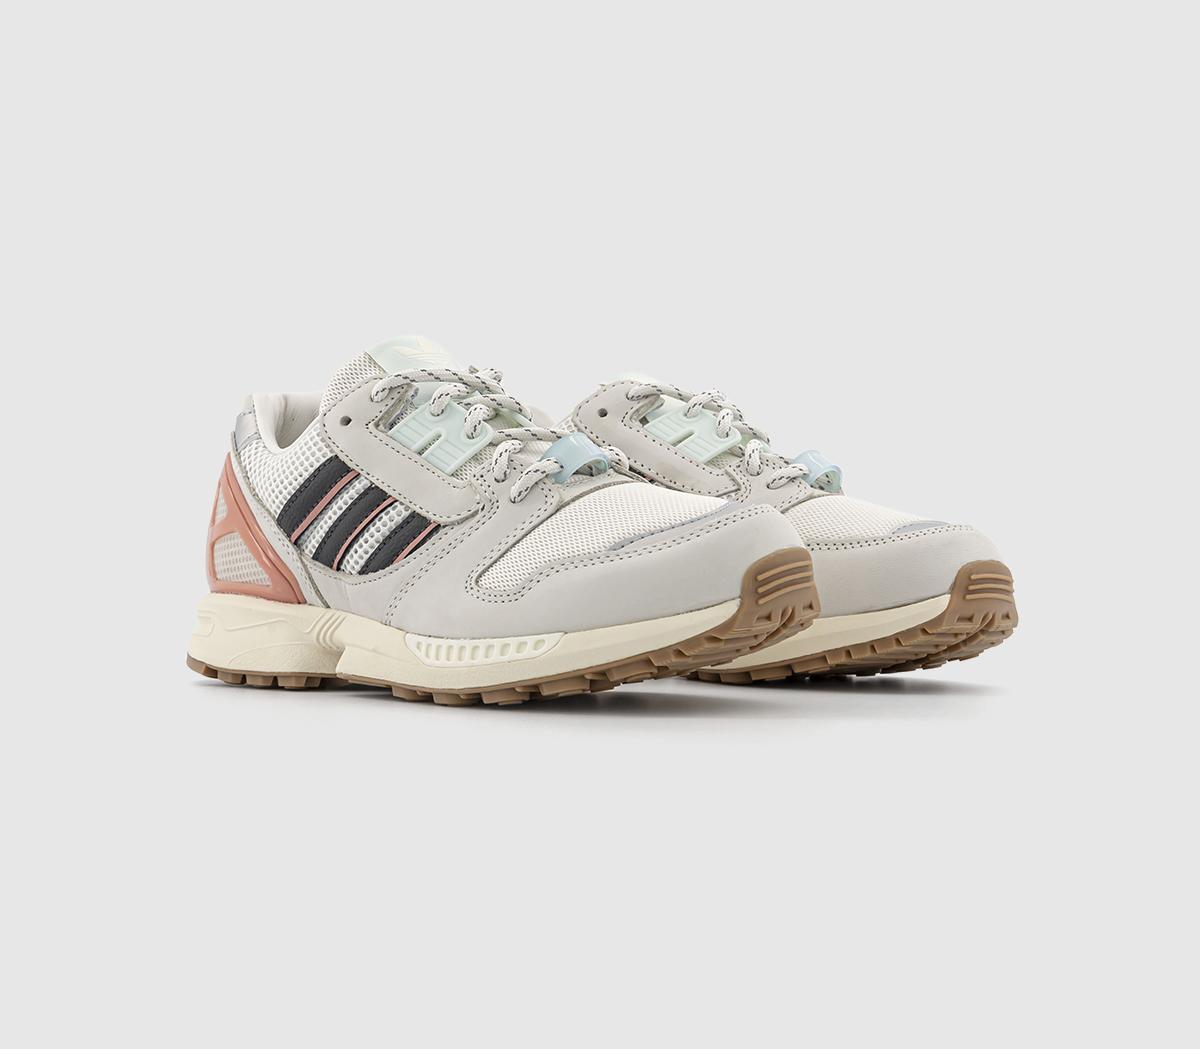 Adidas Womens Z-x Trainers White Tint Offwhite, 5.5